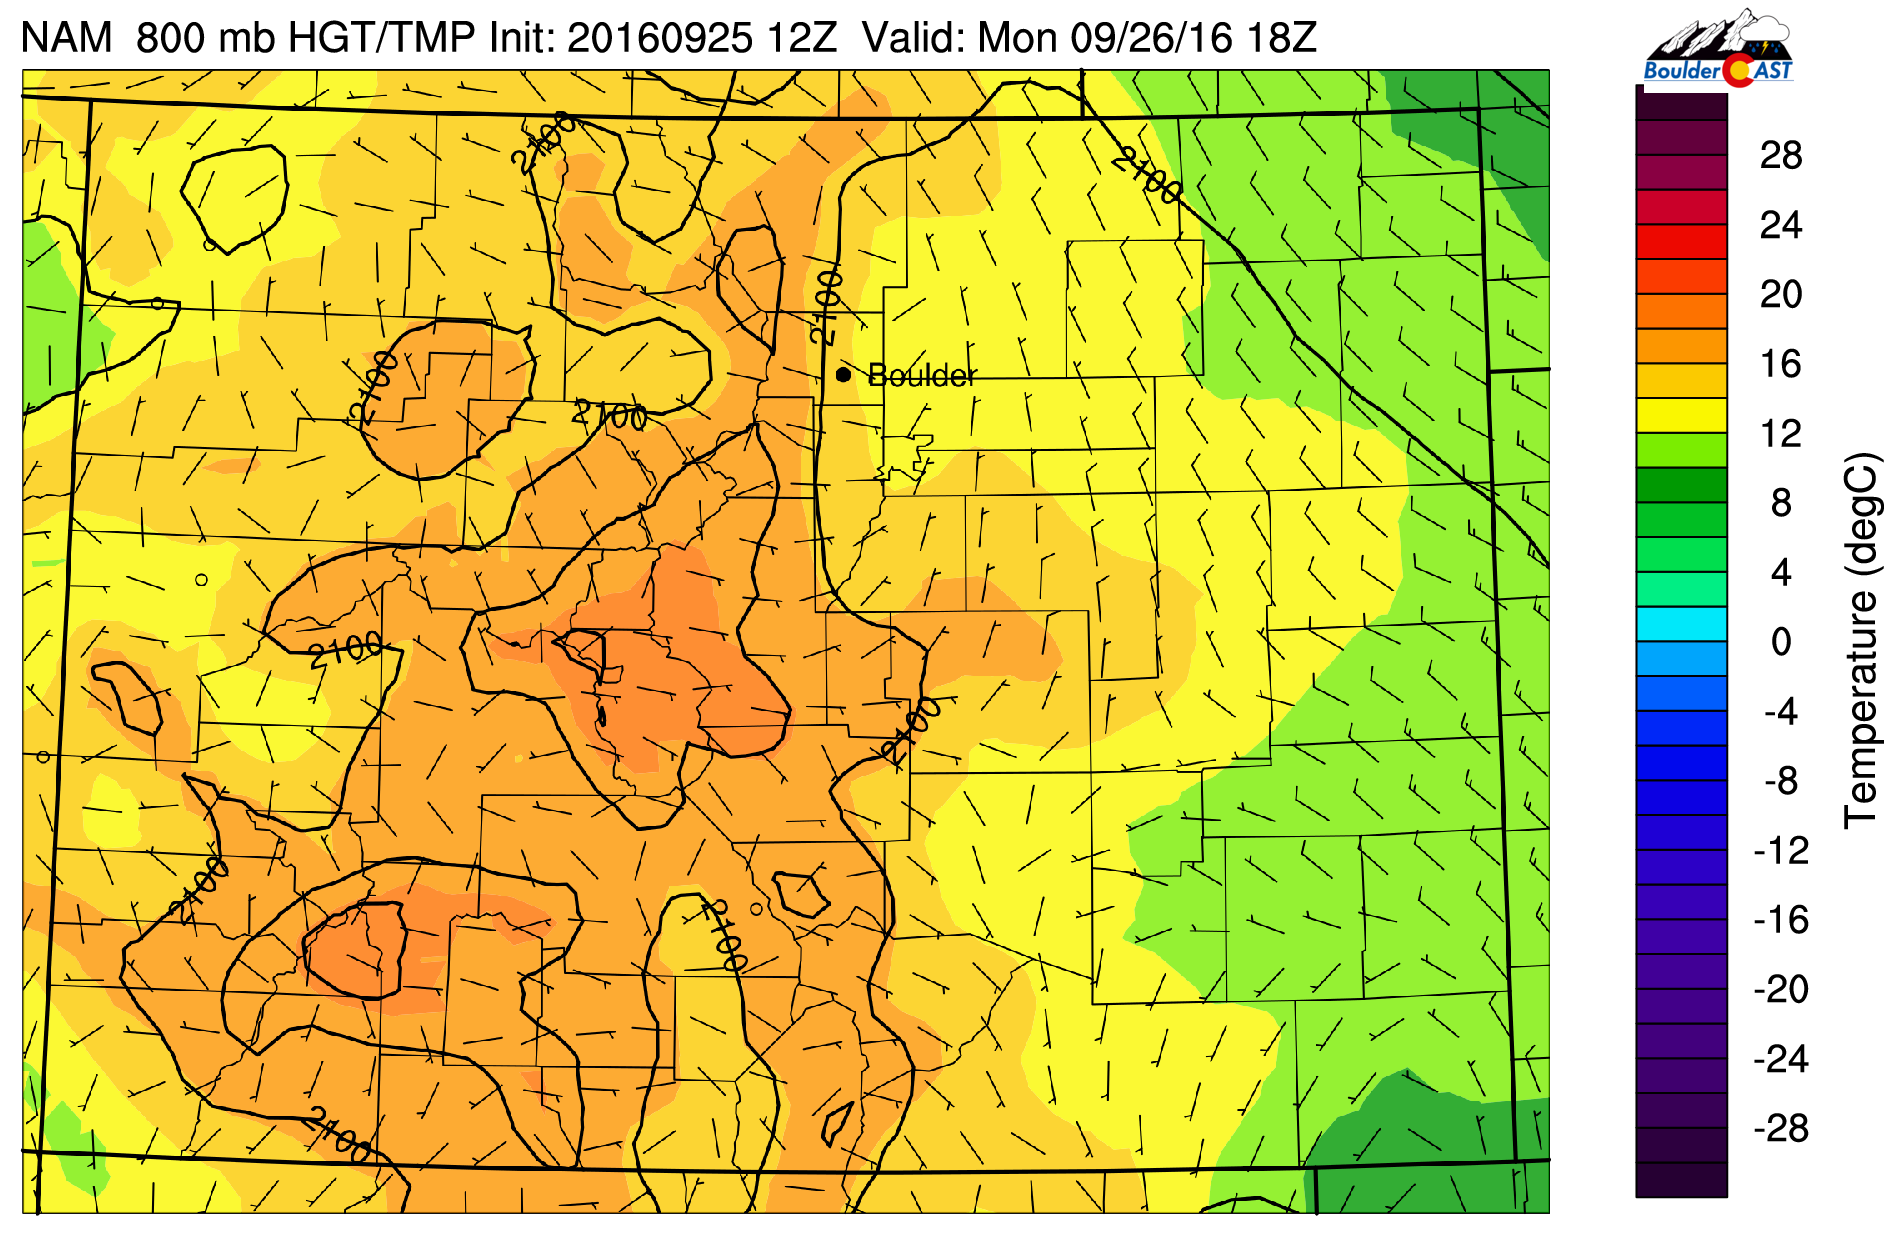 NAM 800 mb temperature and wind pattern today